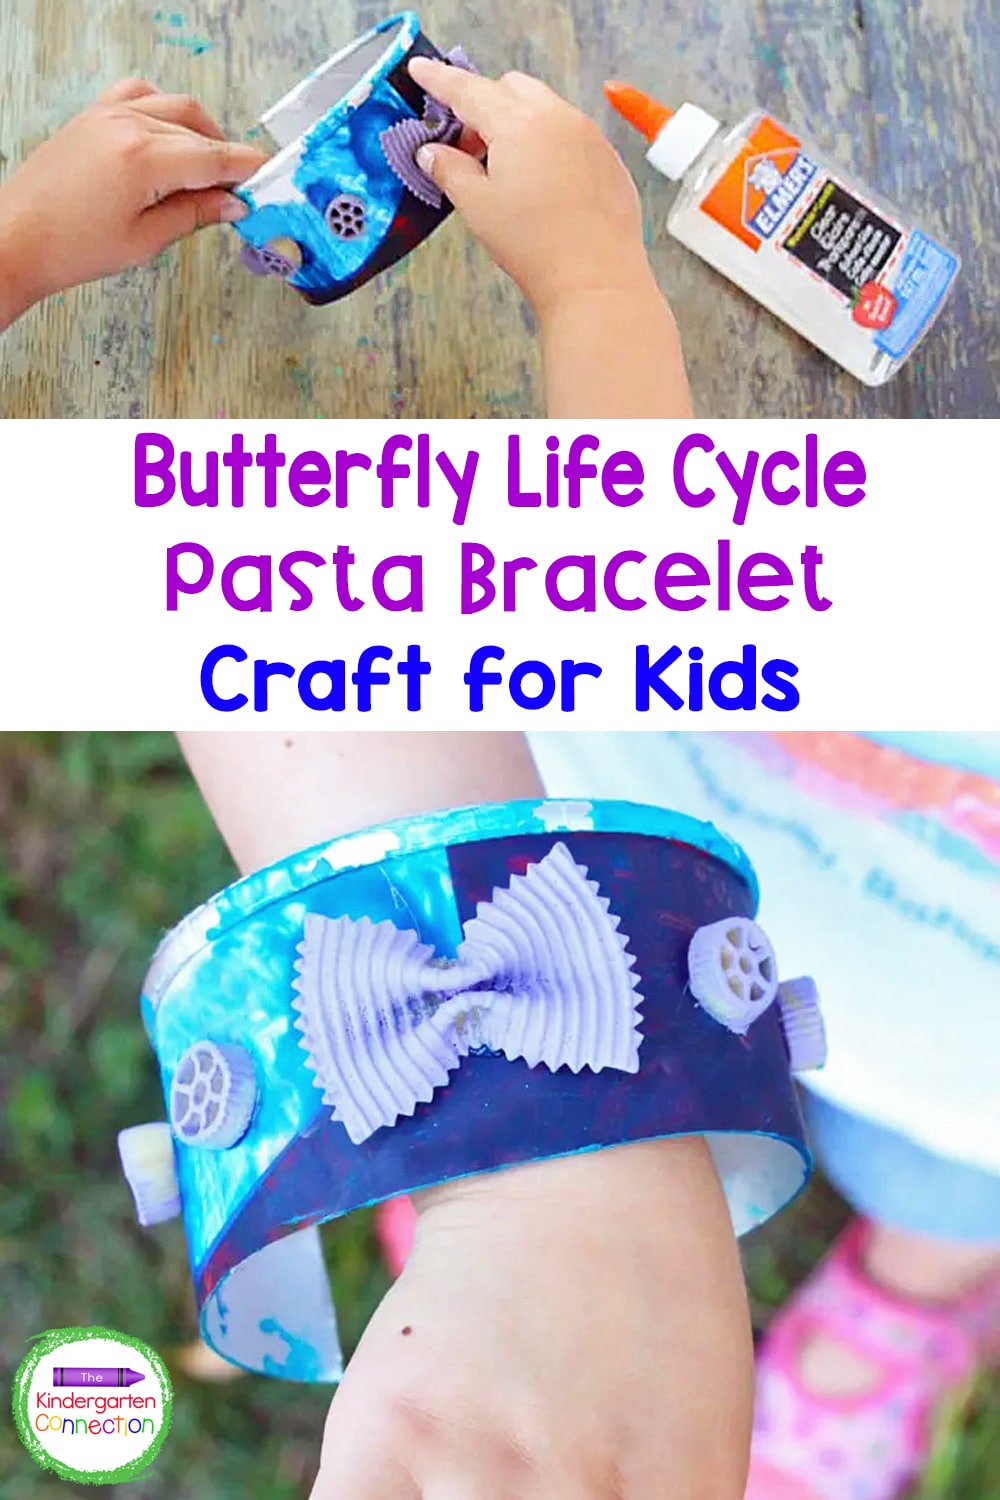 Explore the butterfly life cycle with this fun pasta bracelet craft! Perfect for kids and adding some crafting to your science lessons.